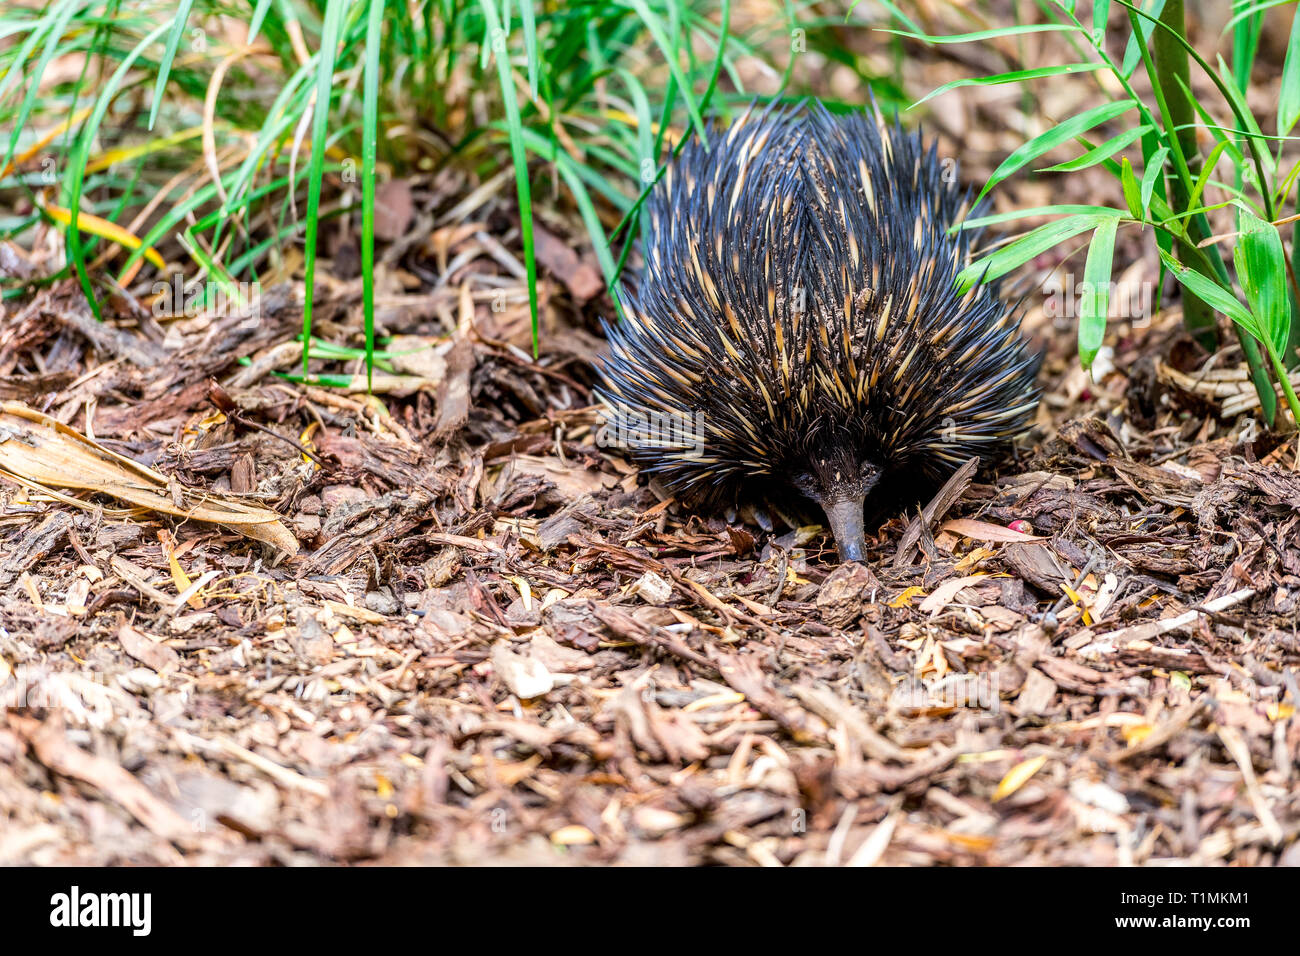 Echidna, an Australian native animal with sharp spines covering its body. Stock Photo